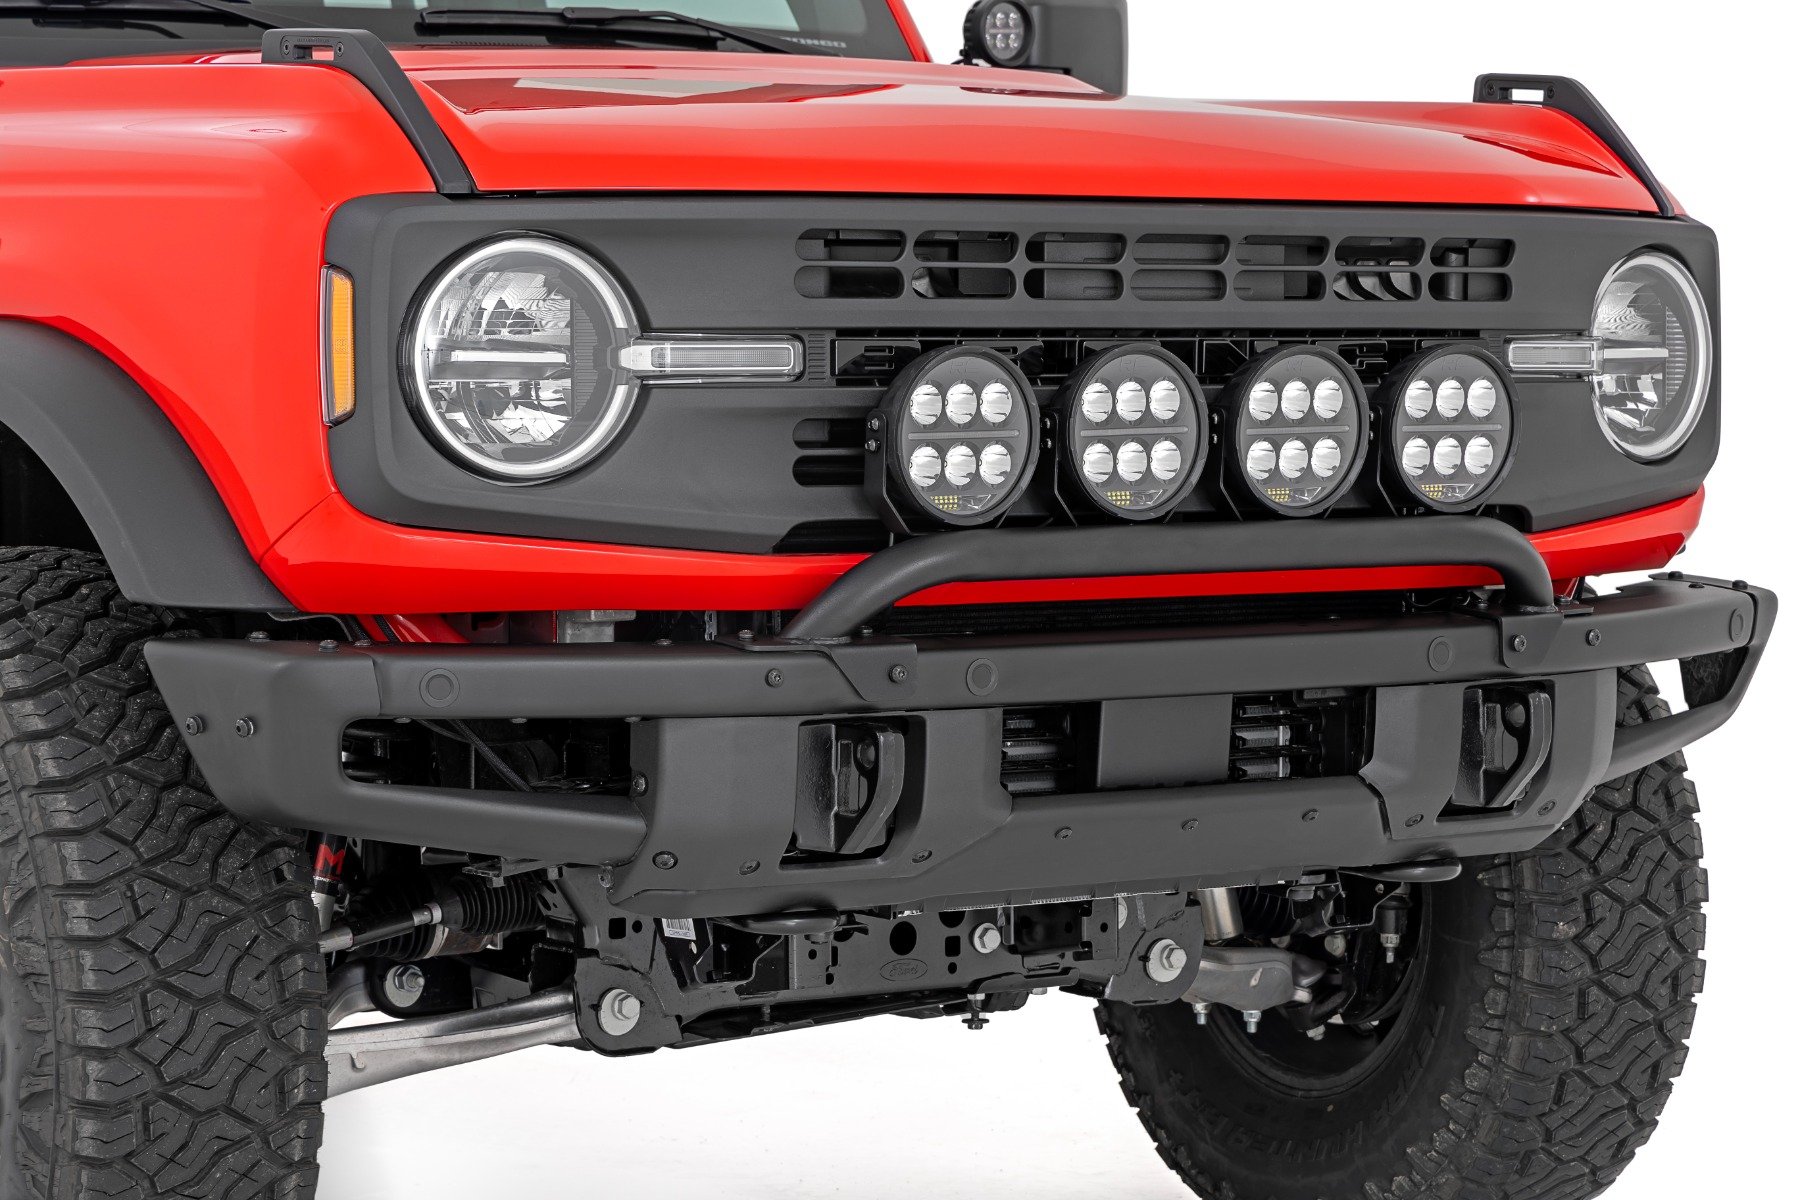 Ford Bronco Front Light Bar Mount - OE Modular Steel Bumper - 6.5 Inch Round LED (Quad) 